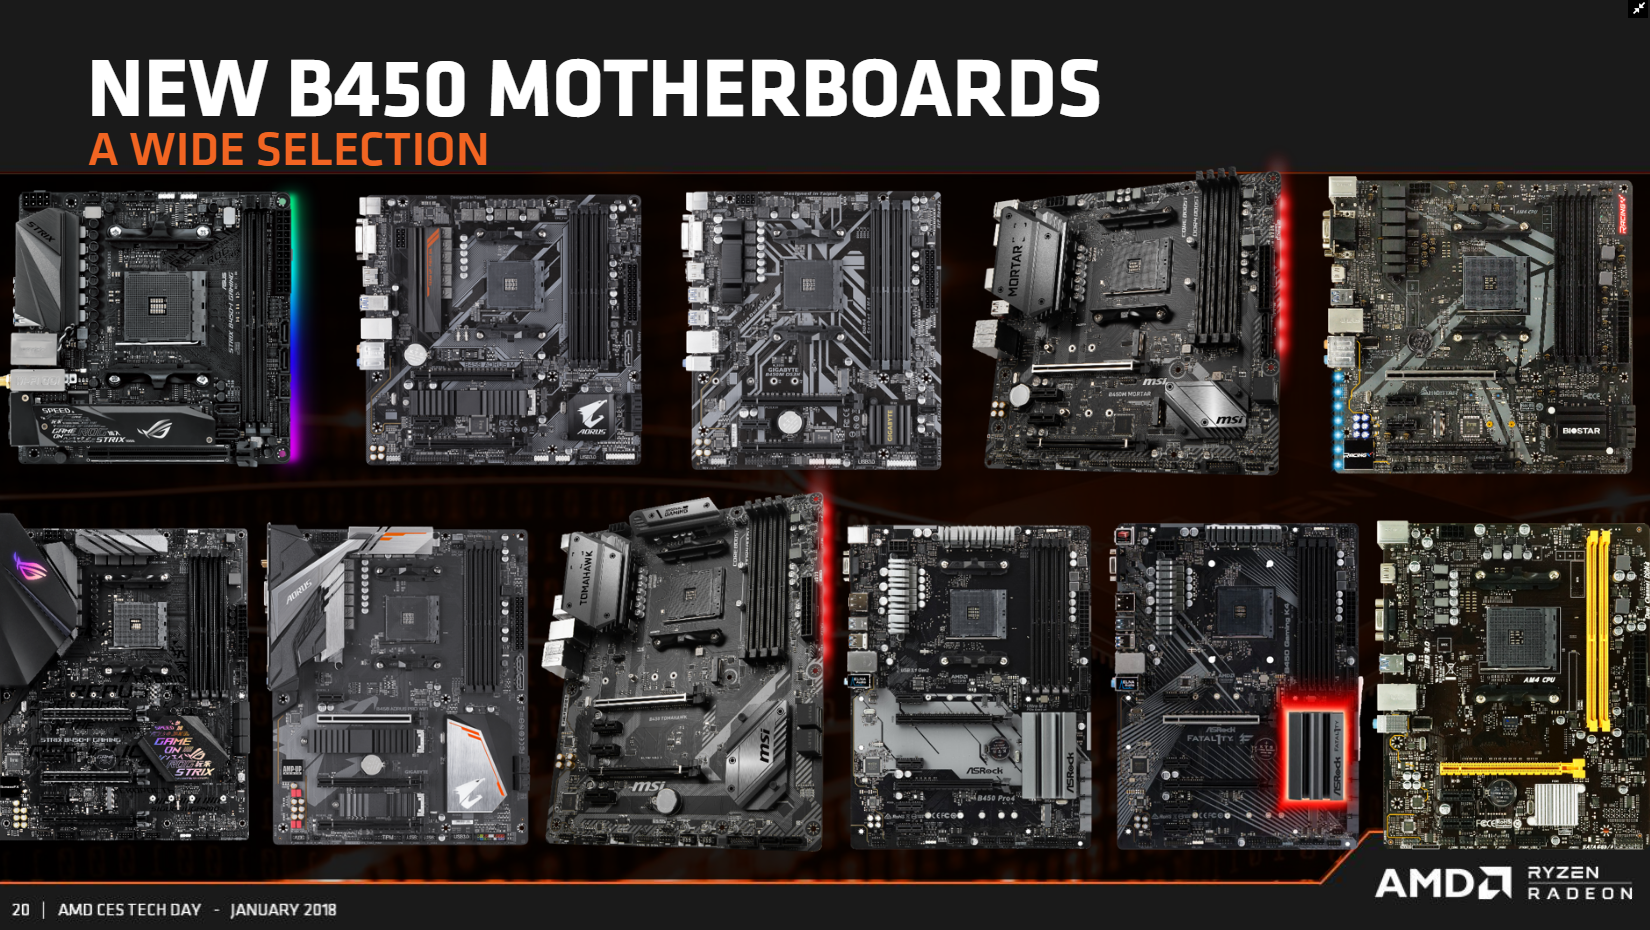 Entire Range of AM4 Motherboards For AMD Ryzen CPUs Pictured